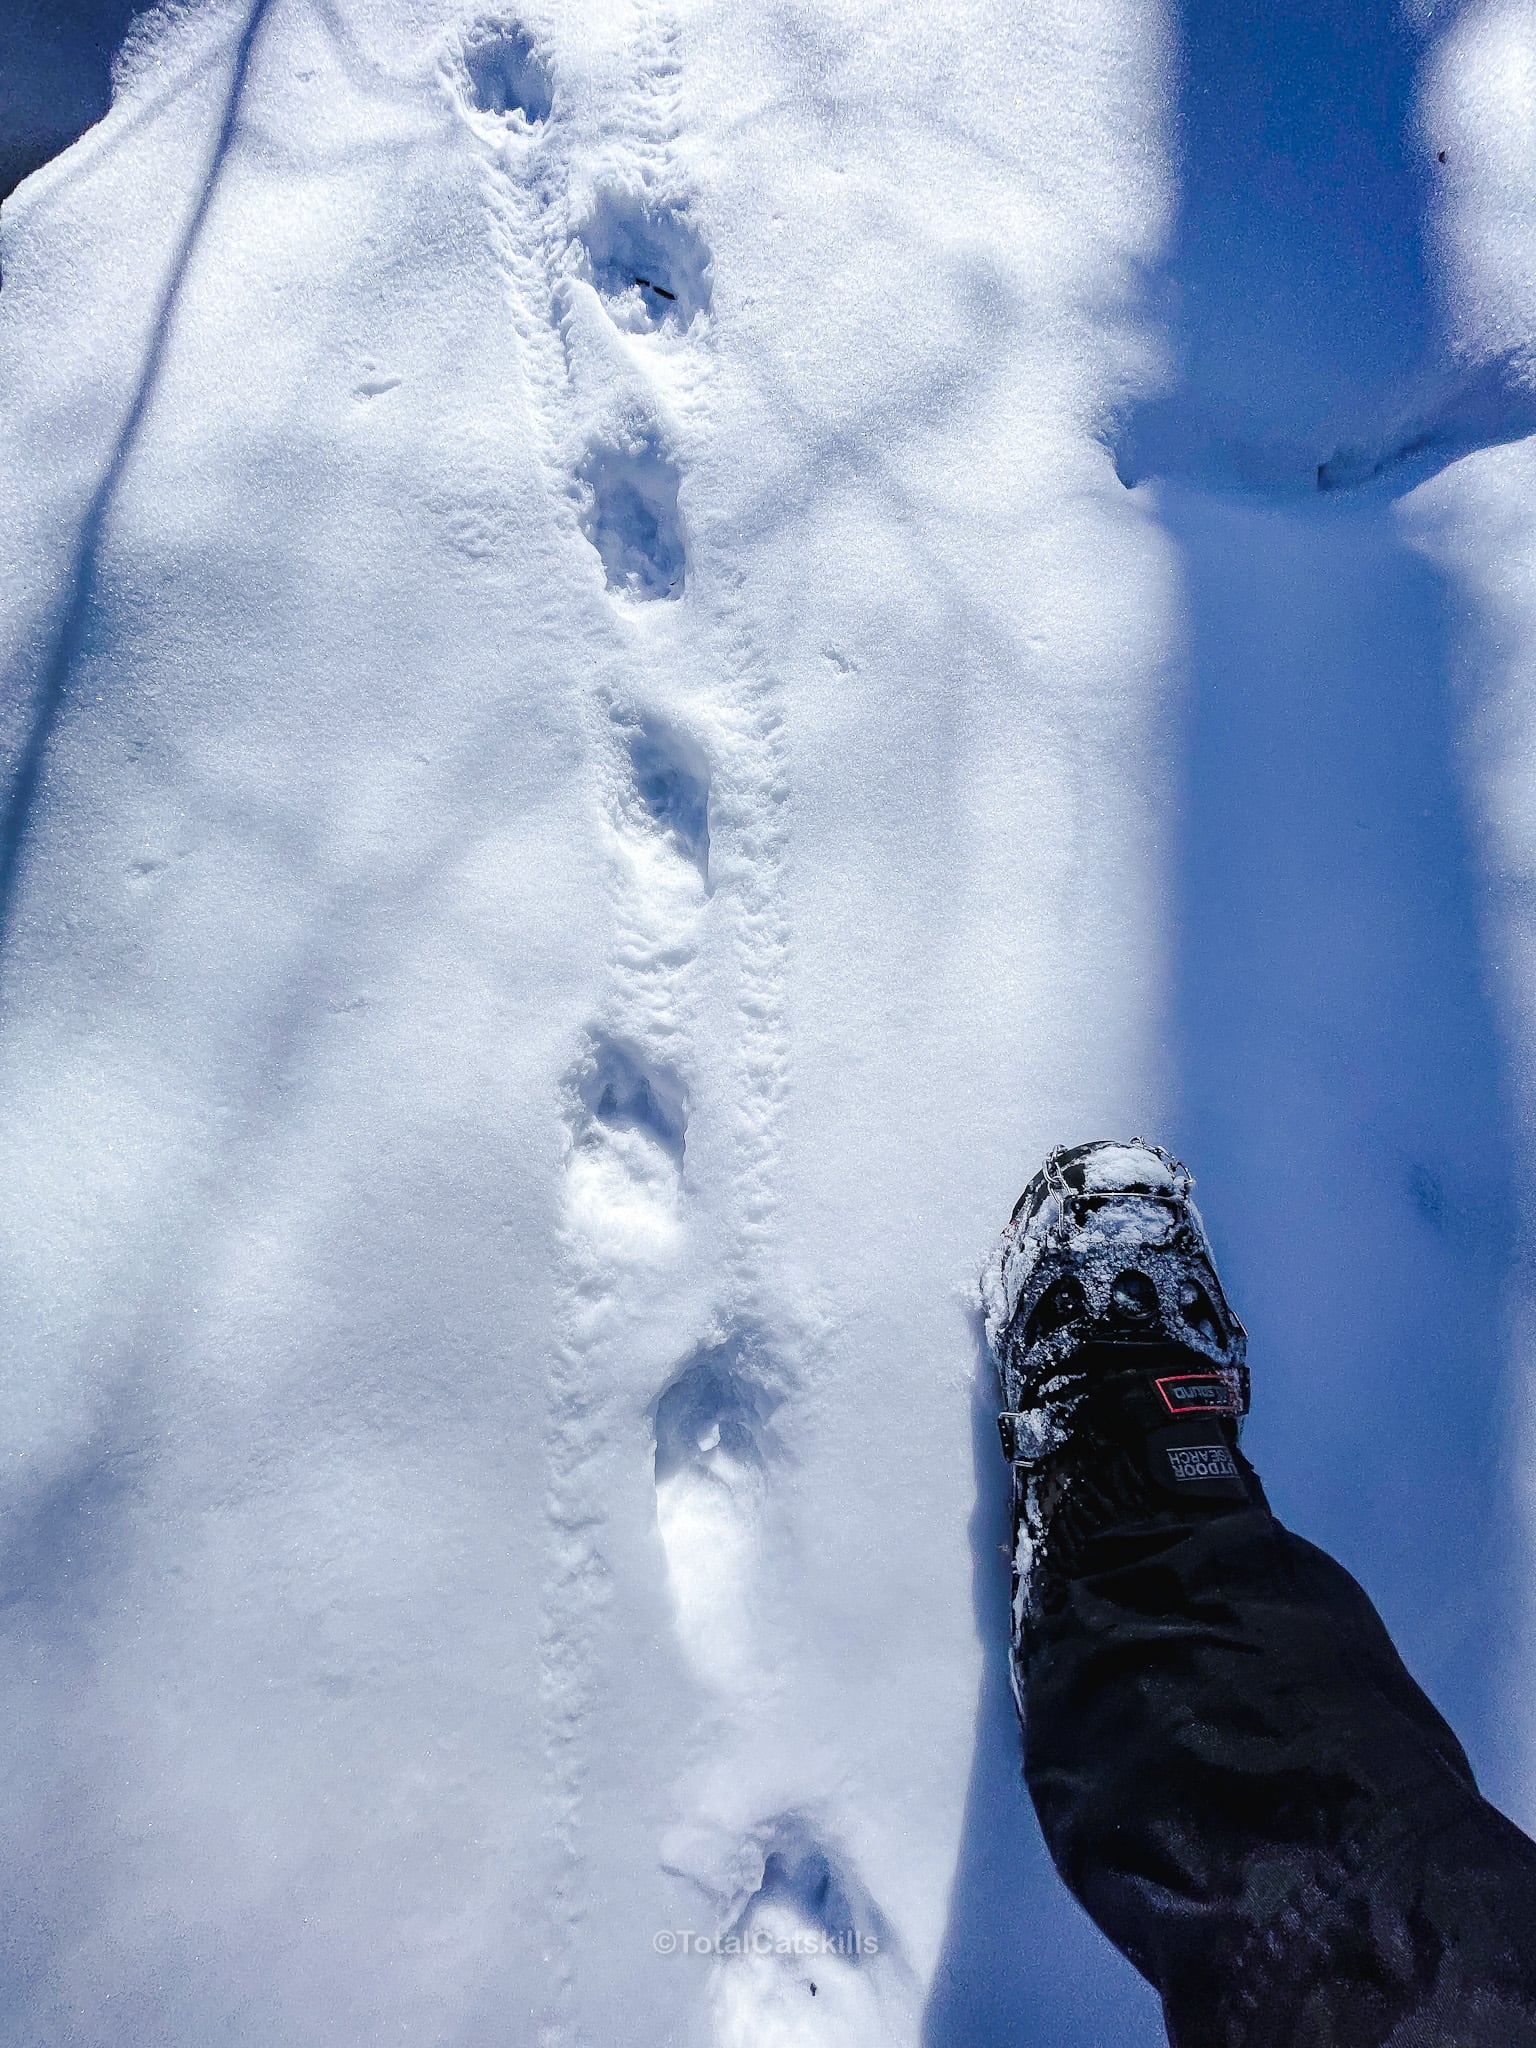 coyote track in snow on sugarloaf mountain